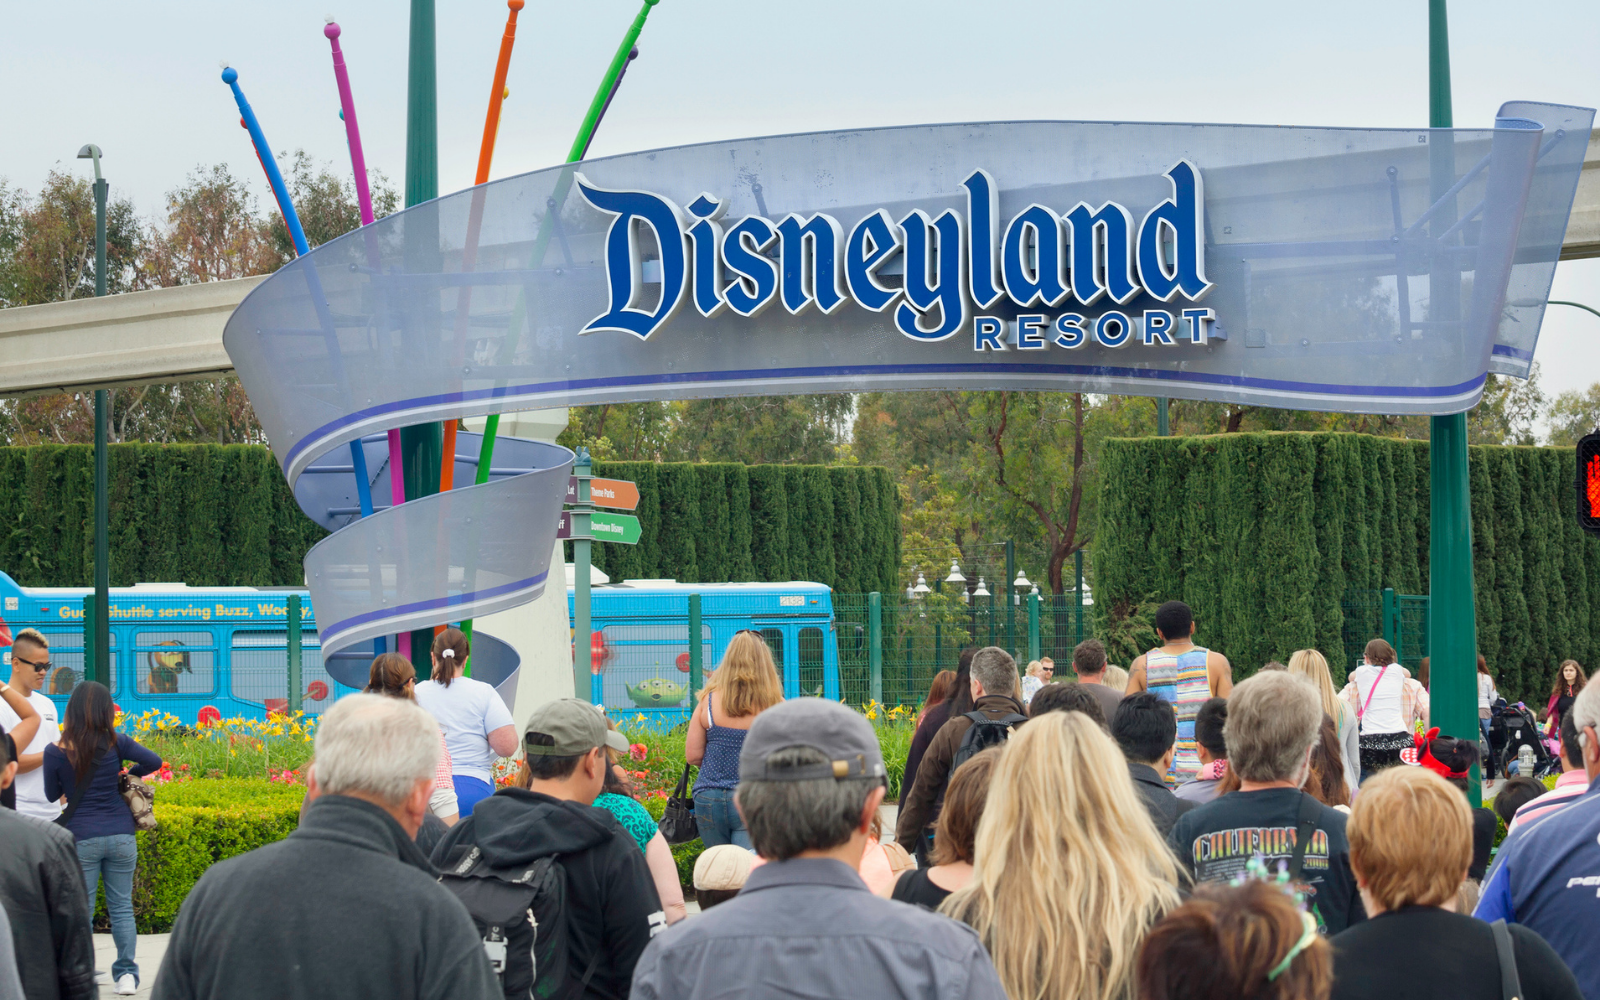 The Best Time to Visit Disneyland in 2023